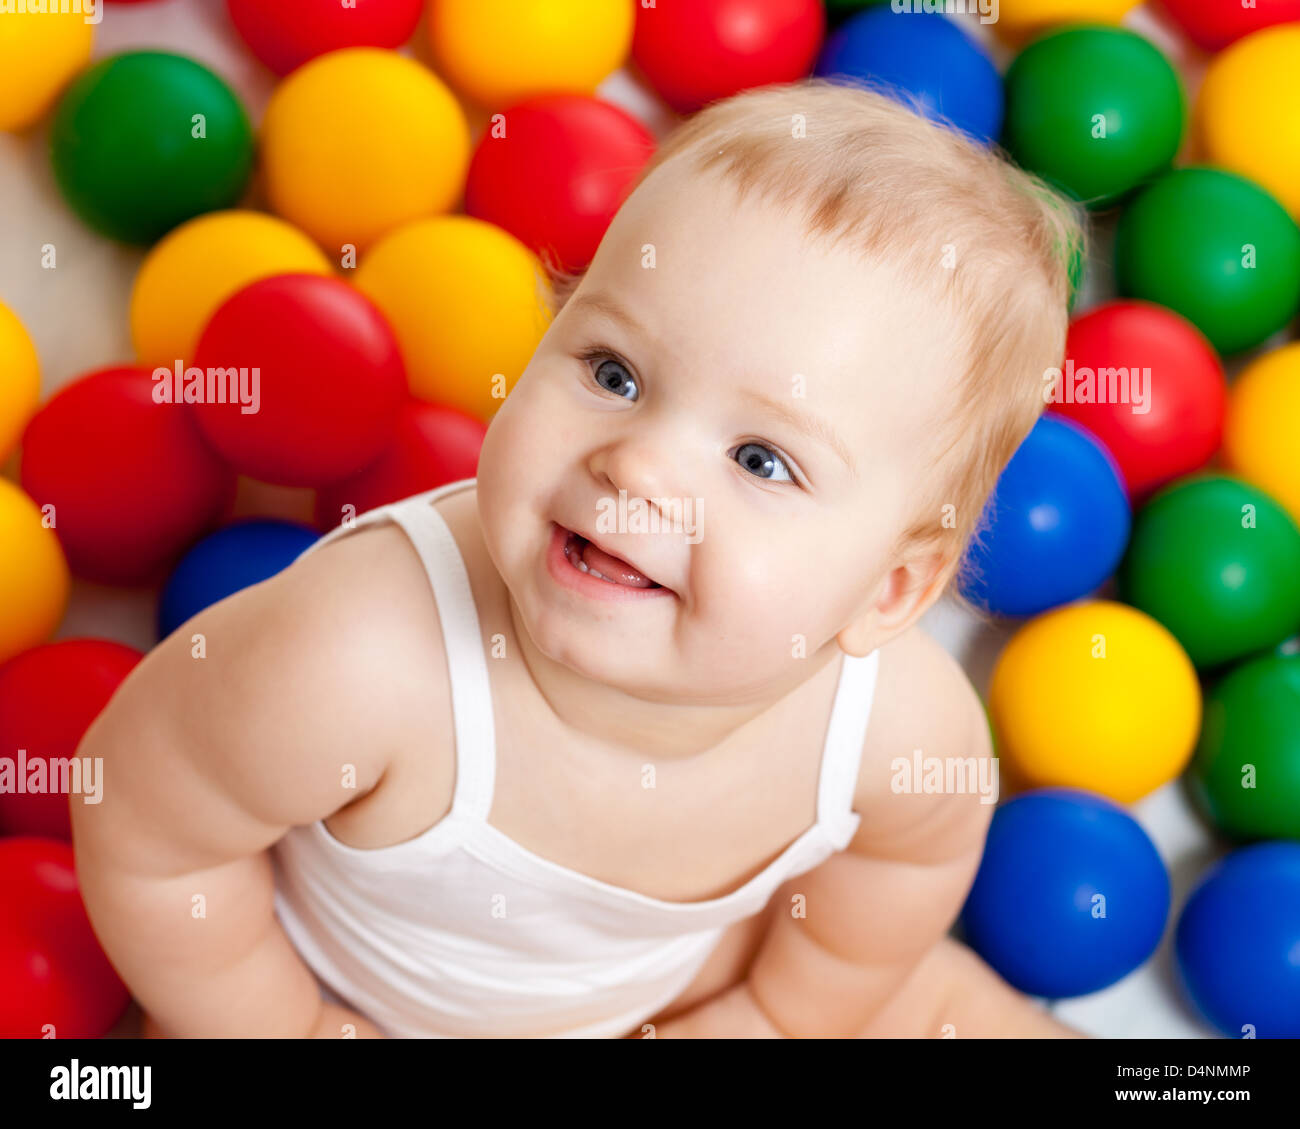 Portrait of a smiling infant sitting among colorful balls Stock Photo